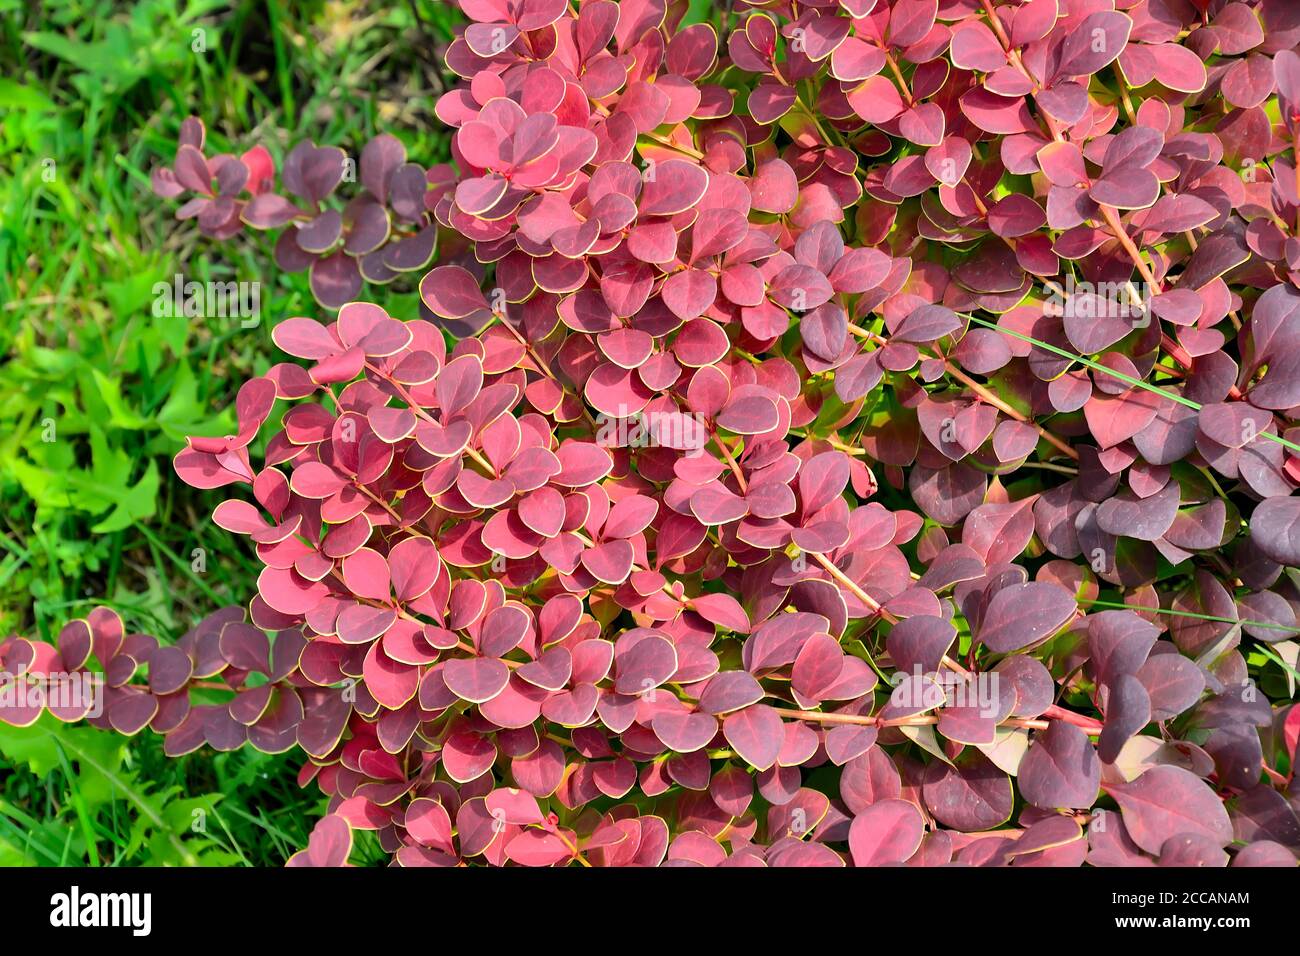 Cultivar Thunbergs barberry twigs (Berberis thunbergii 'Coral') close up. Bright ornamental bush with vivid red-burgundy leaves with yellow border. Ga Stock Photo